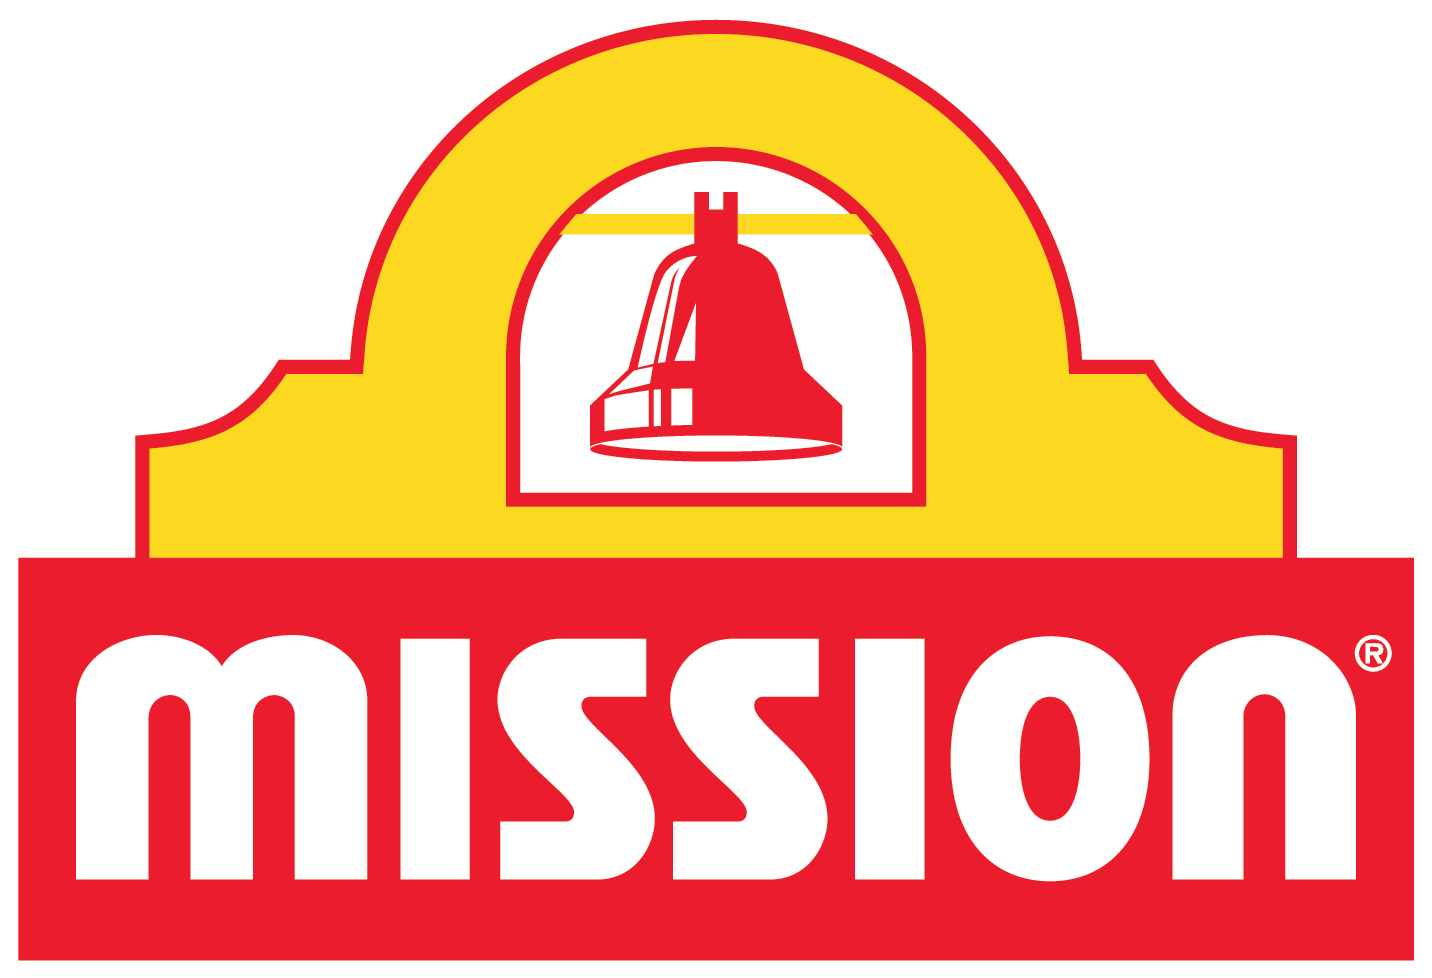 Mission Foods, Nutella Team Up for “Breakfast All Wrapped Up”